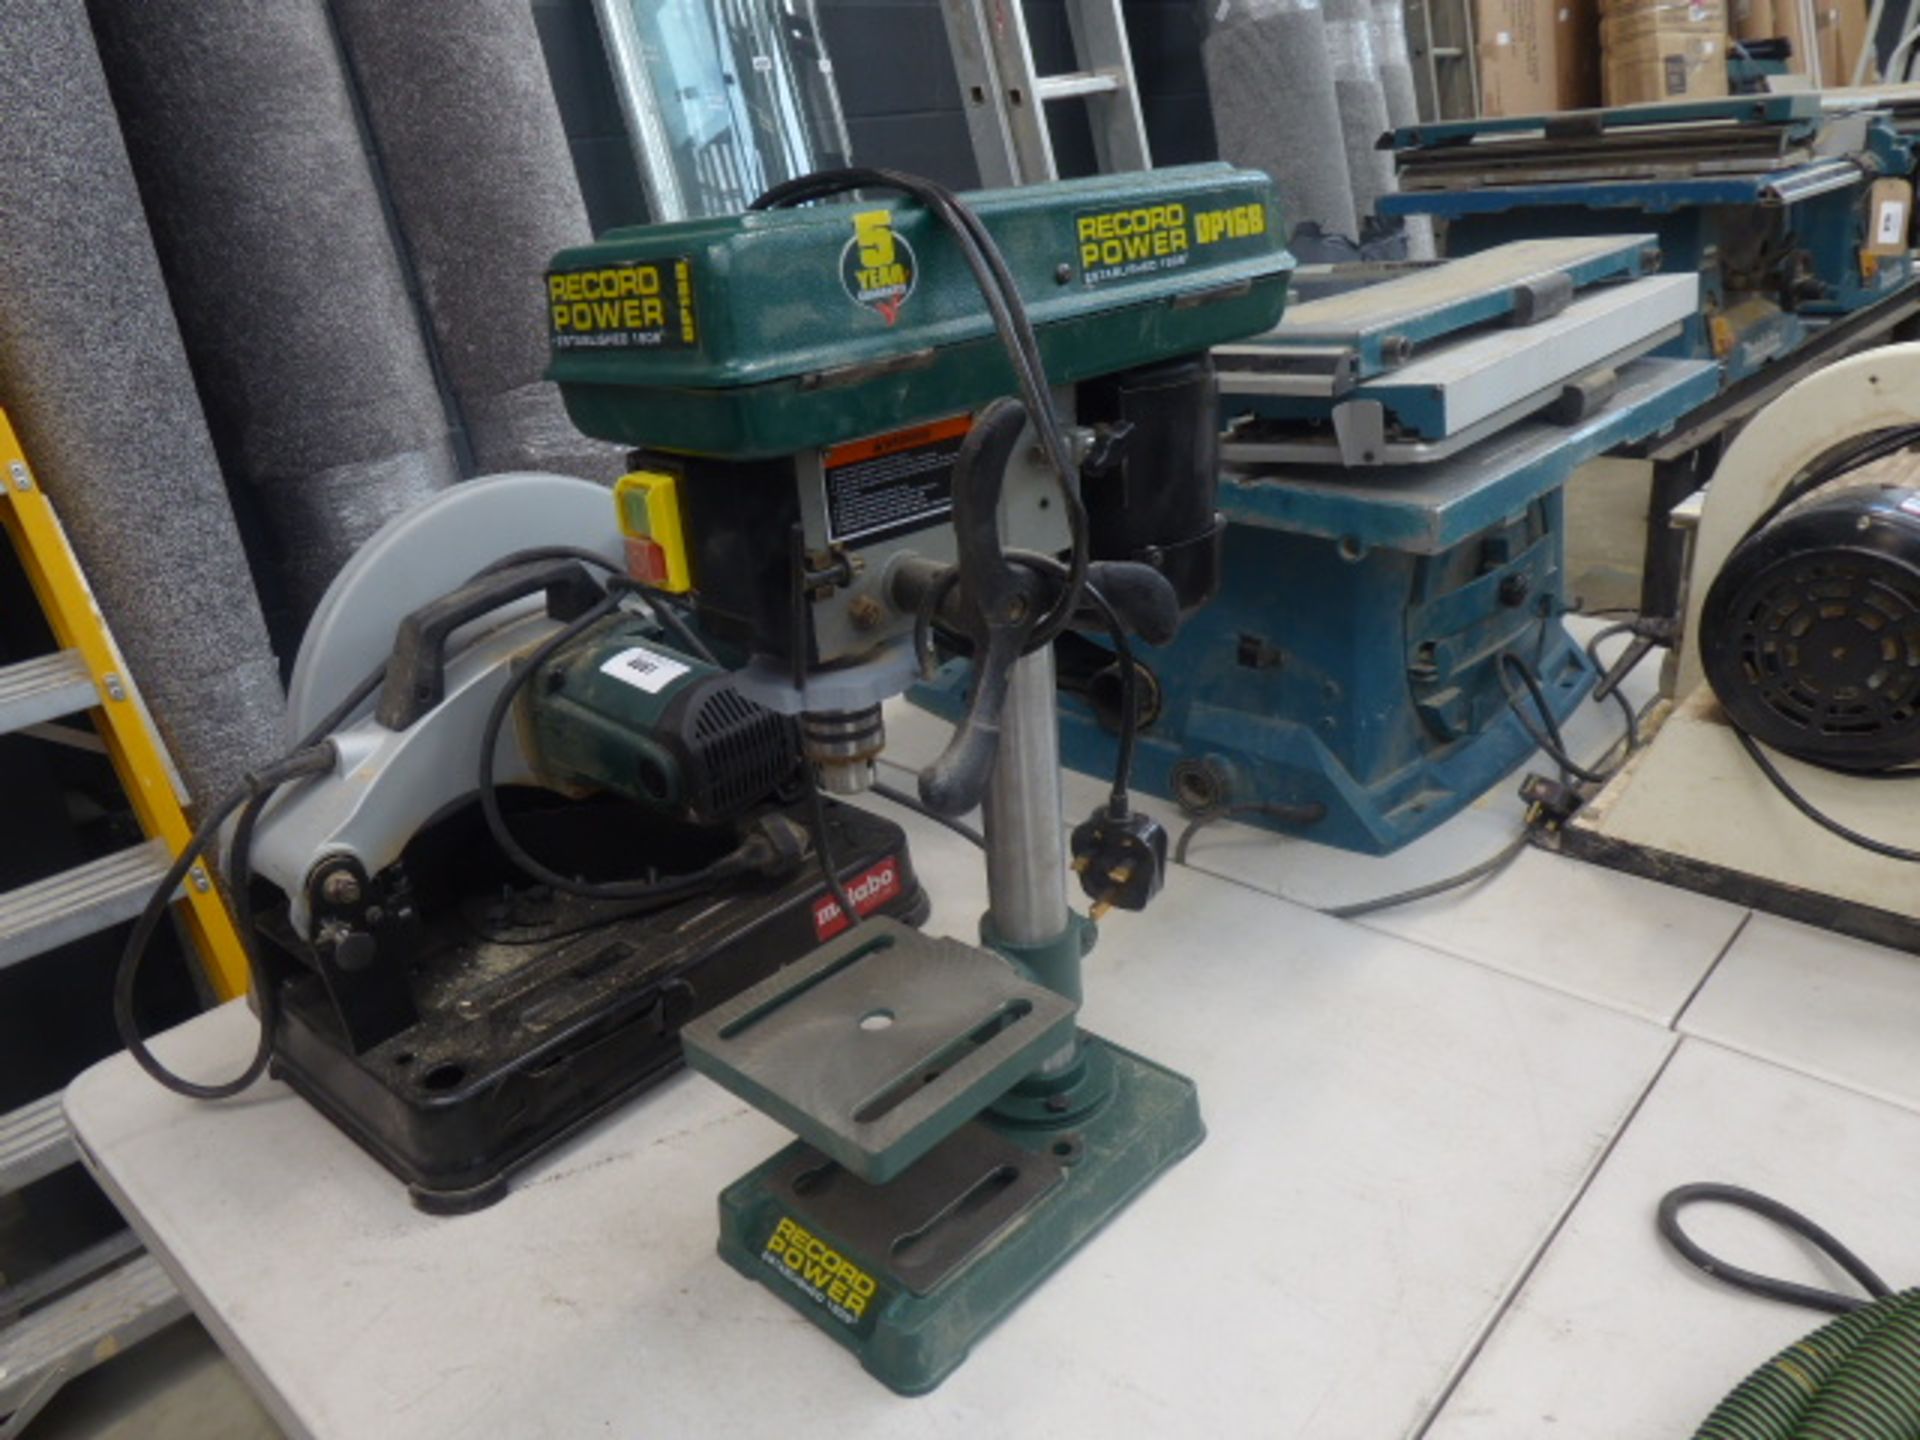 Record Power DP16V single phase electric bench drill.